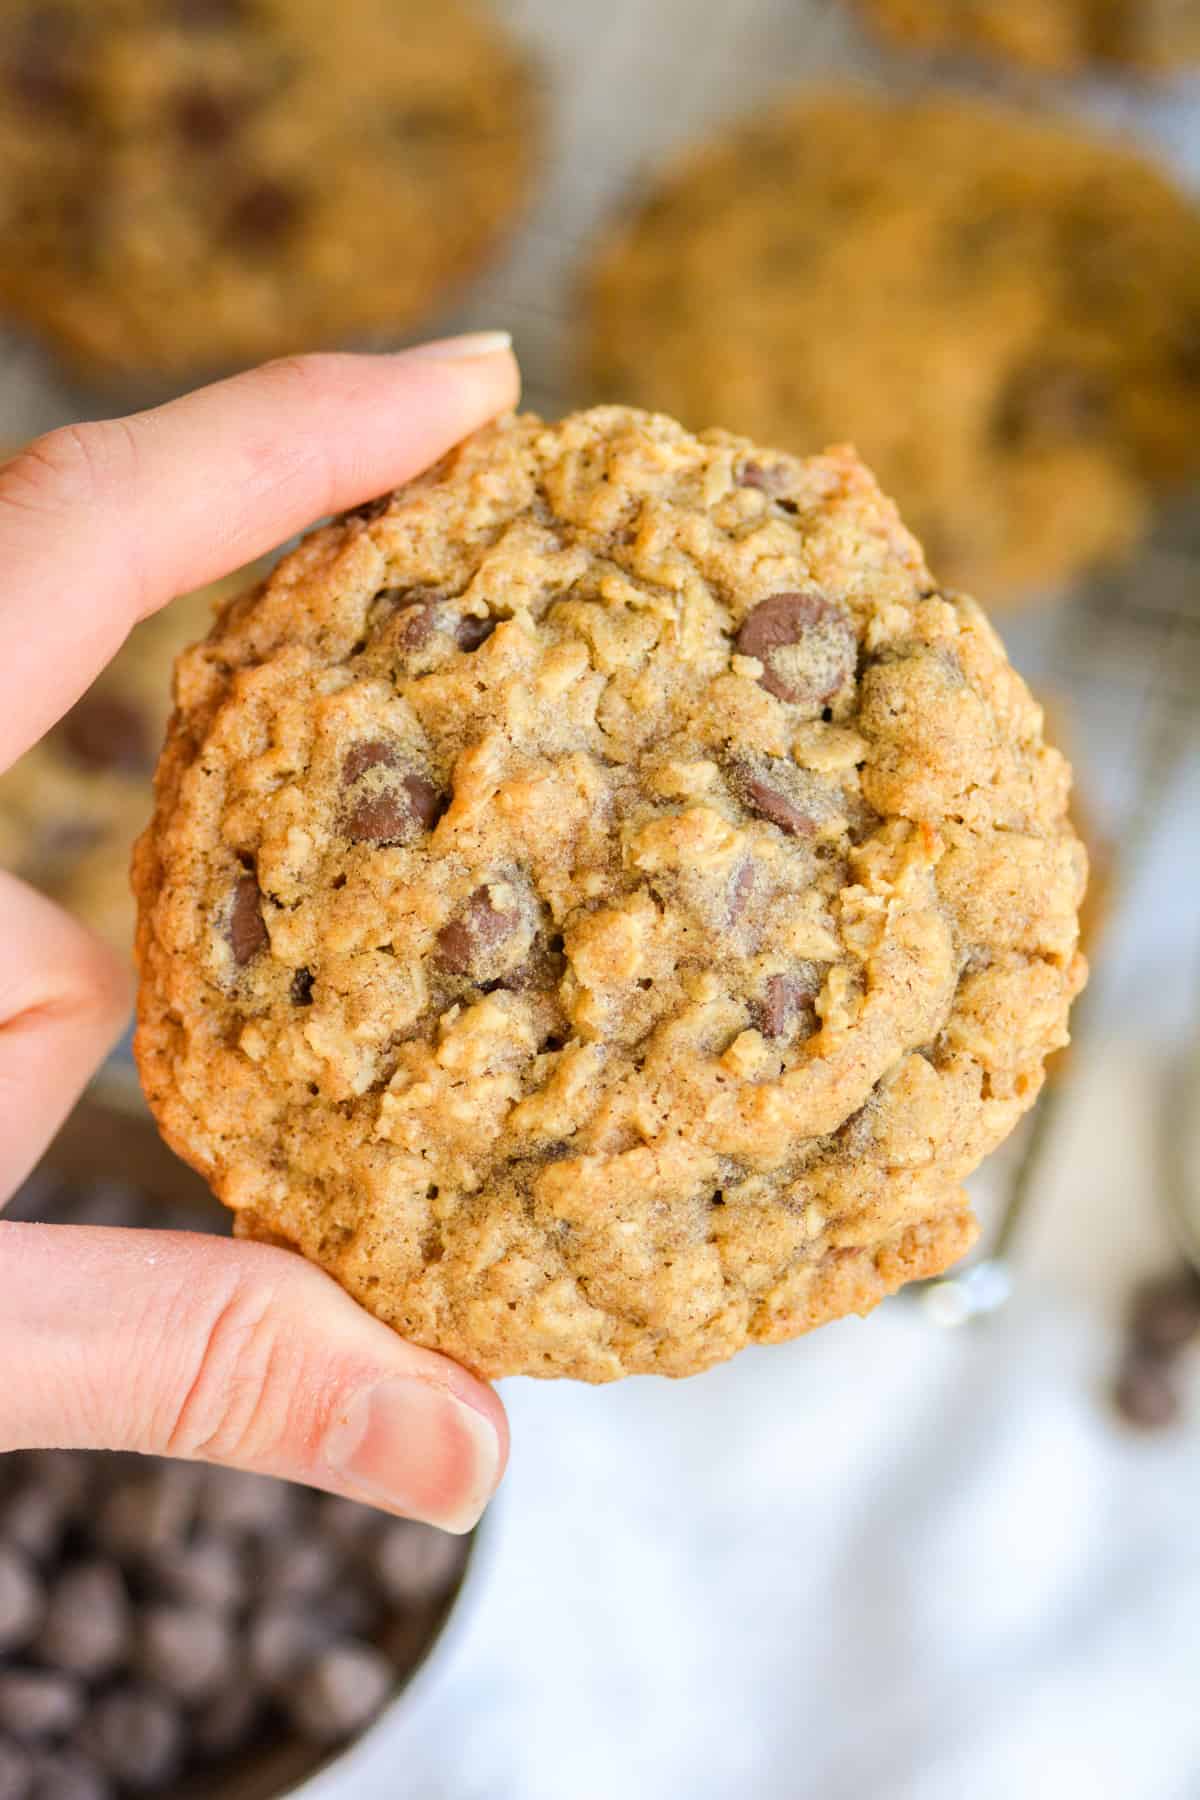 Hand holding a vegan oatmeal chocolate chip cookie.